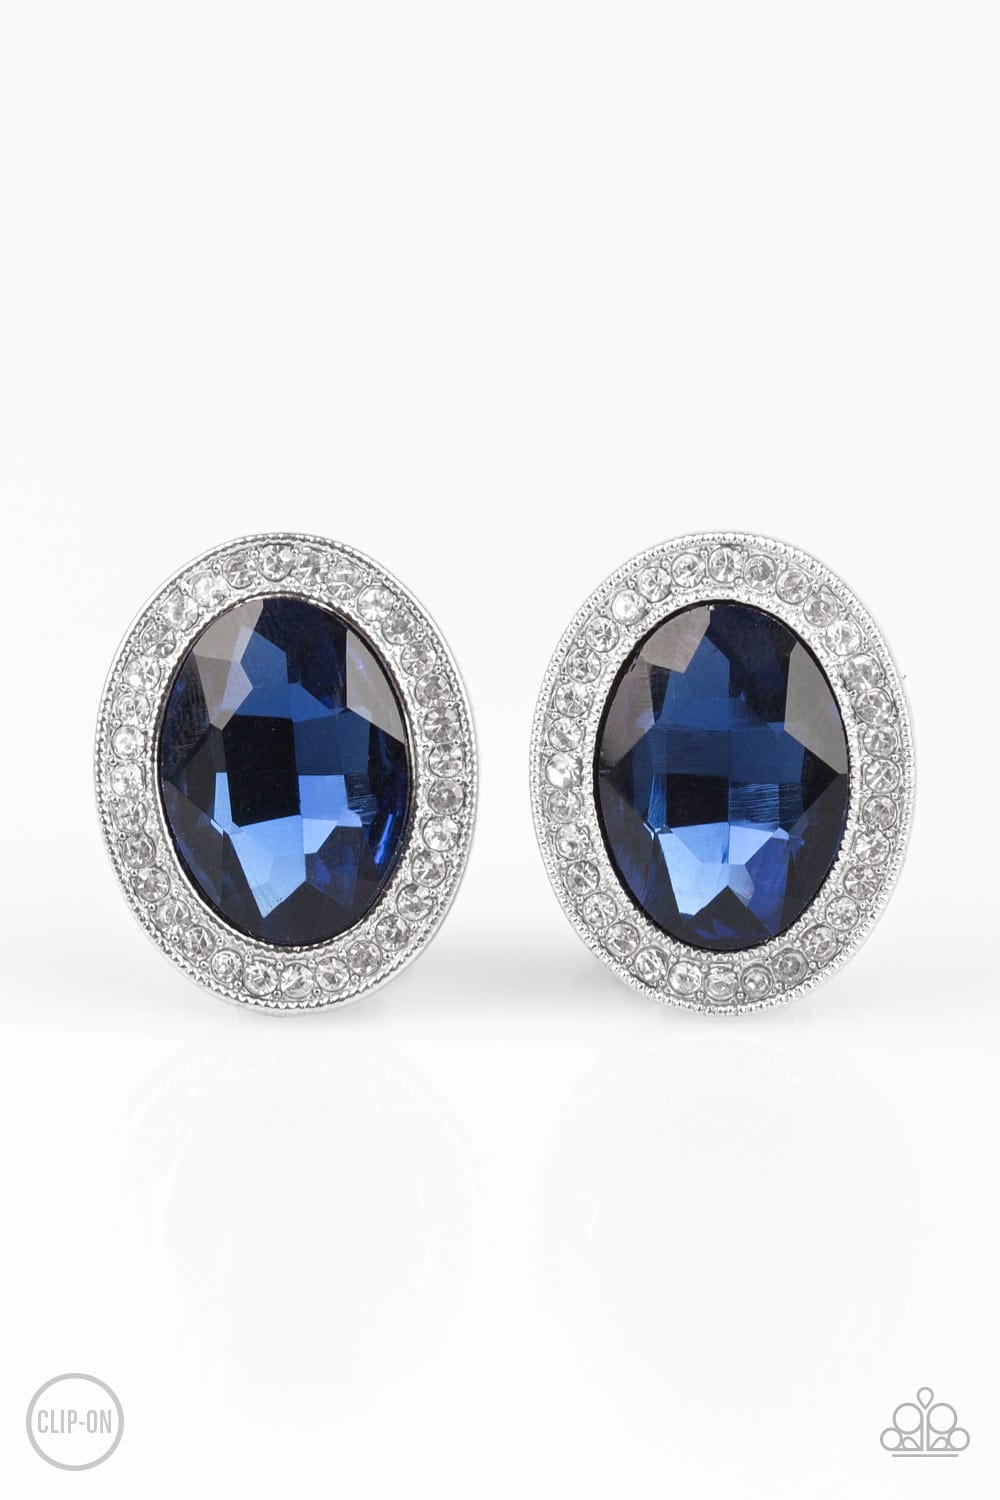 Paparazzi: Only FAME In Town - Blue Clip-On Earrings - Jewels N’ Thingz Boutique